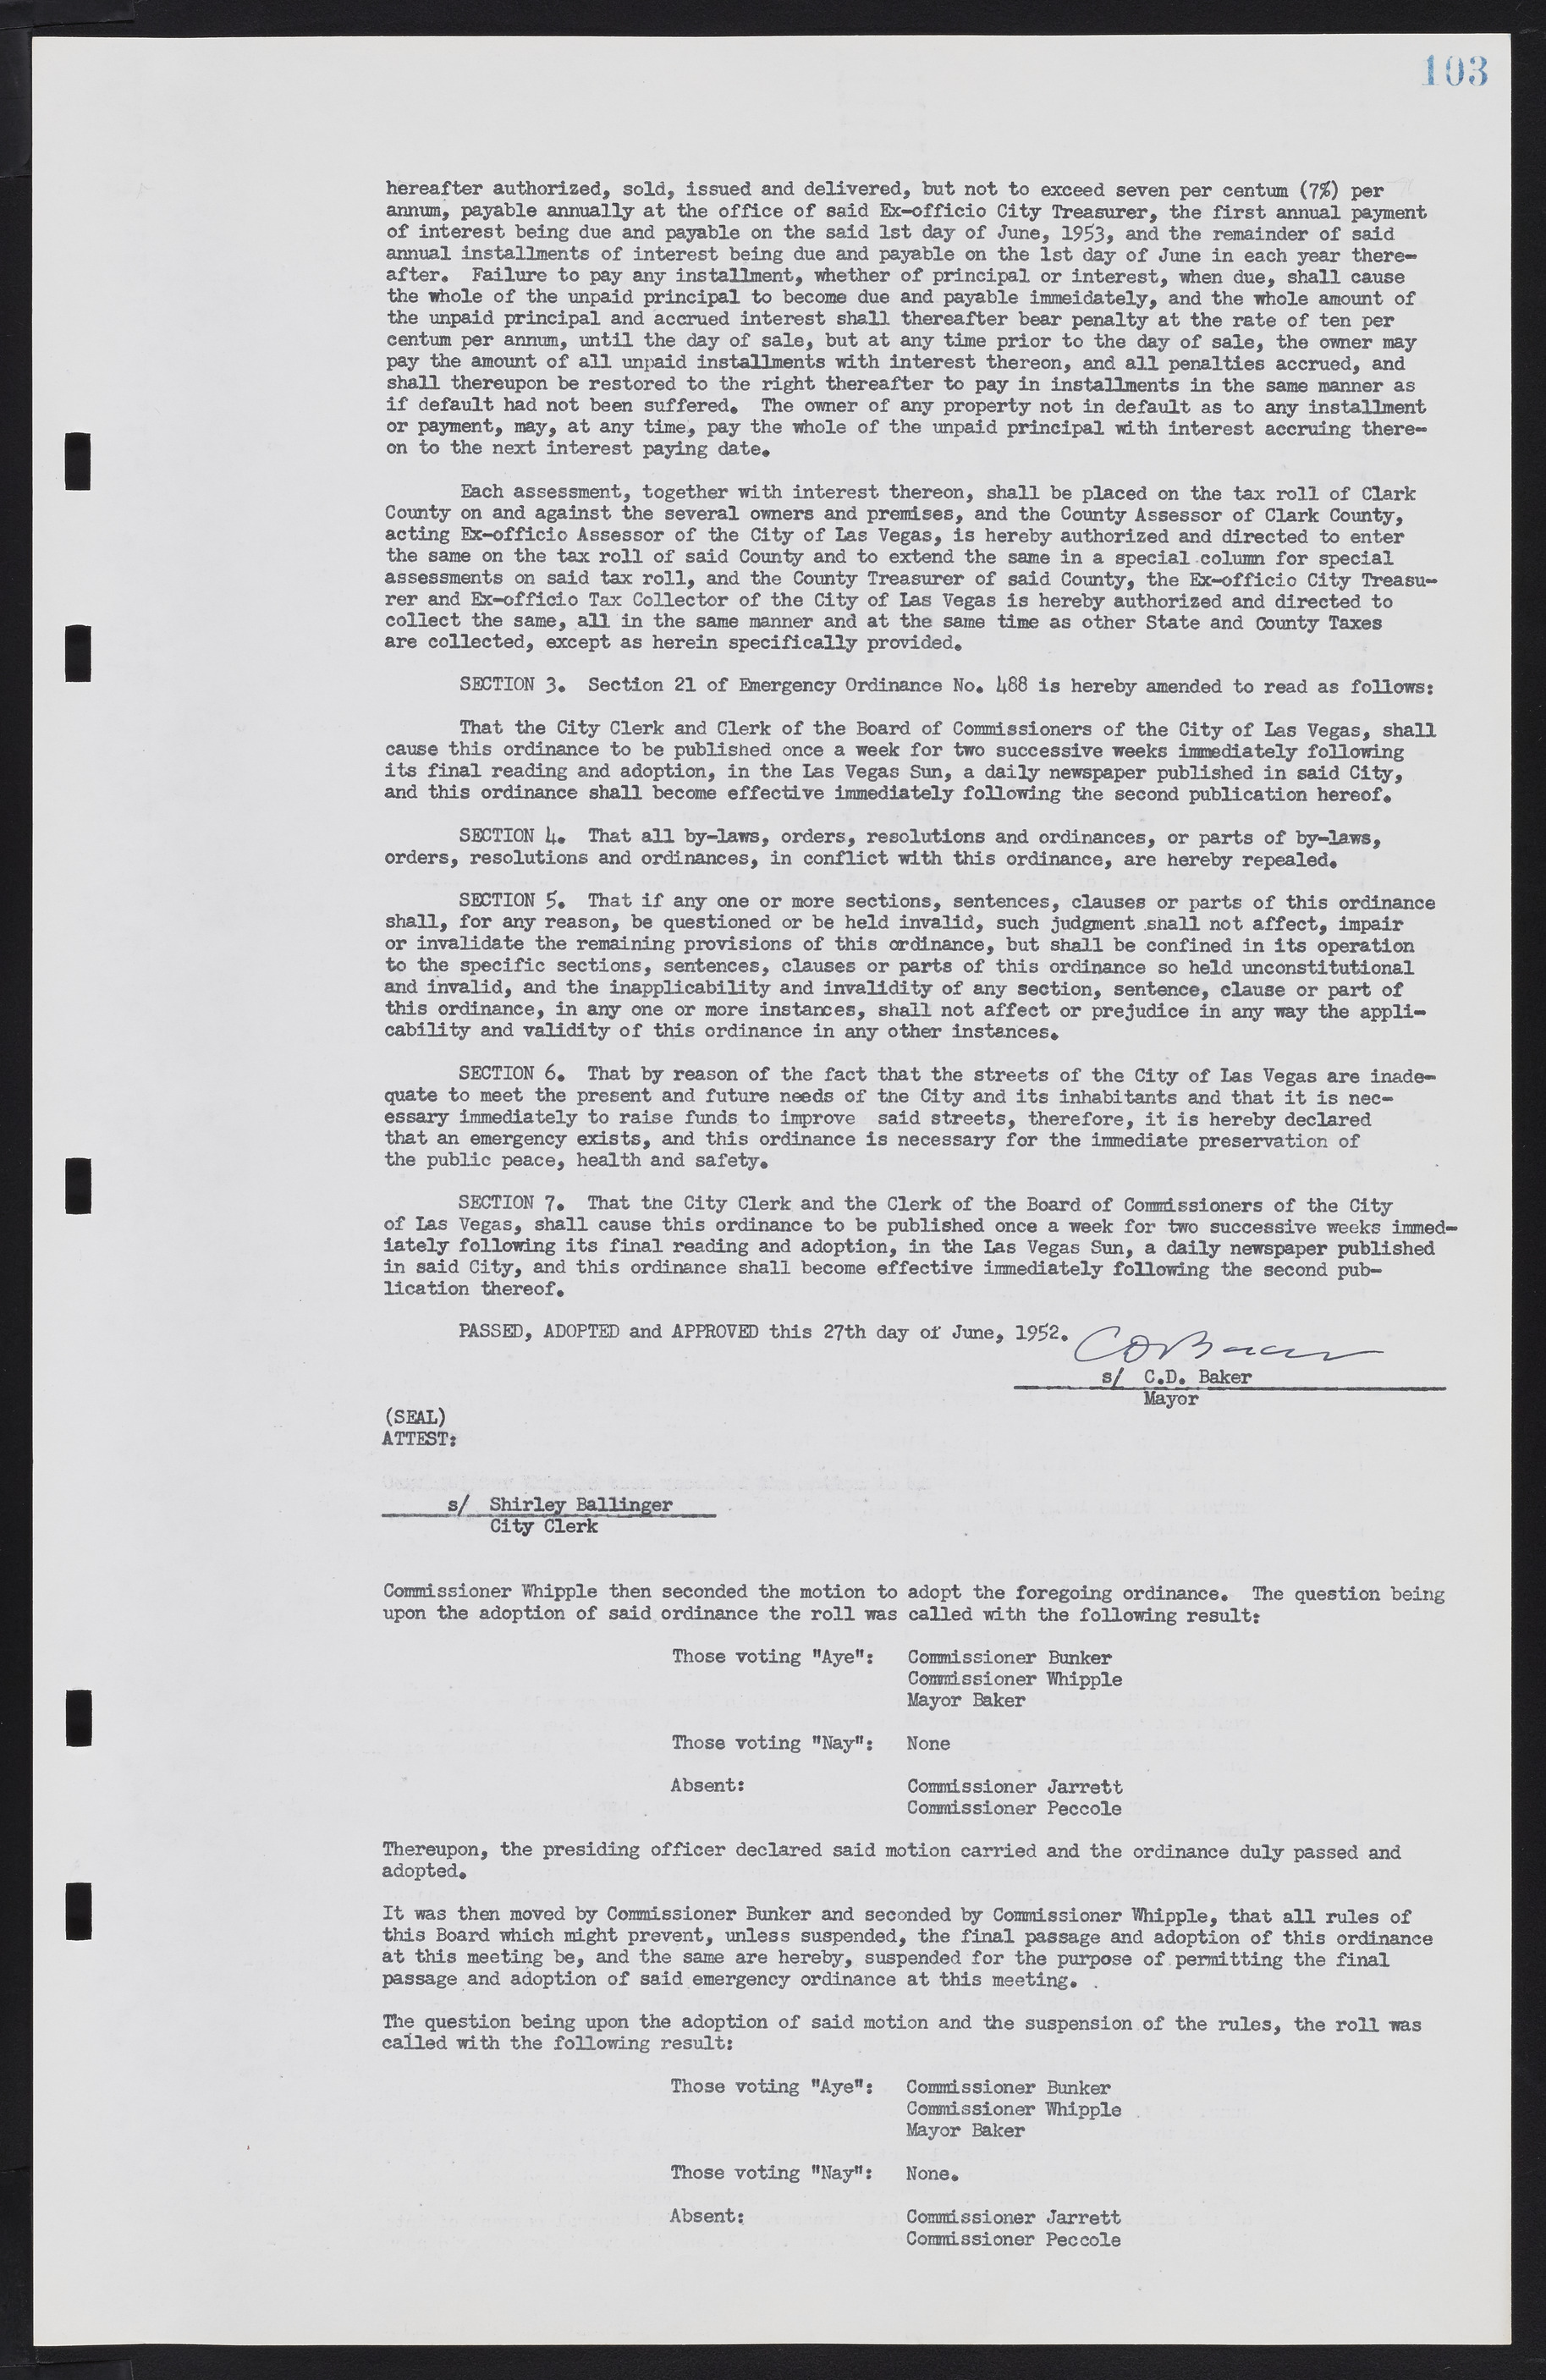 Las Vegas City Commission Minutes, May 26, 1952 to February 17, 1954, lvc000008-107